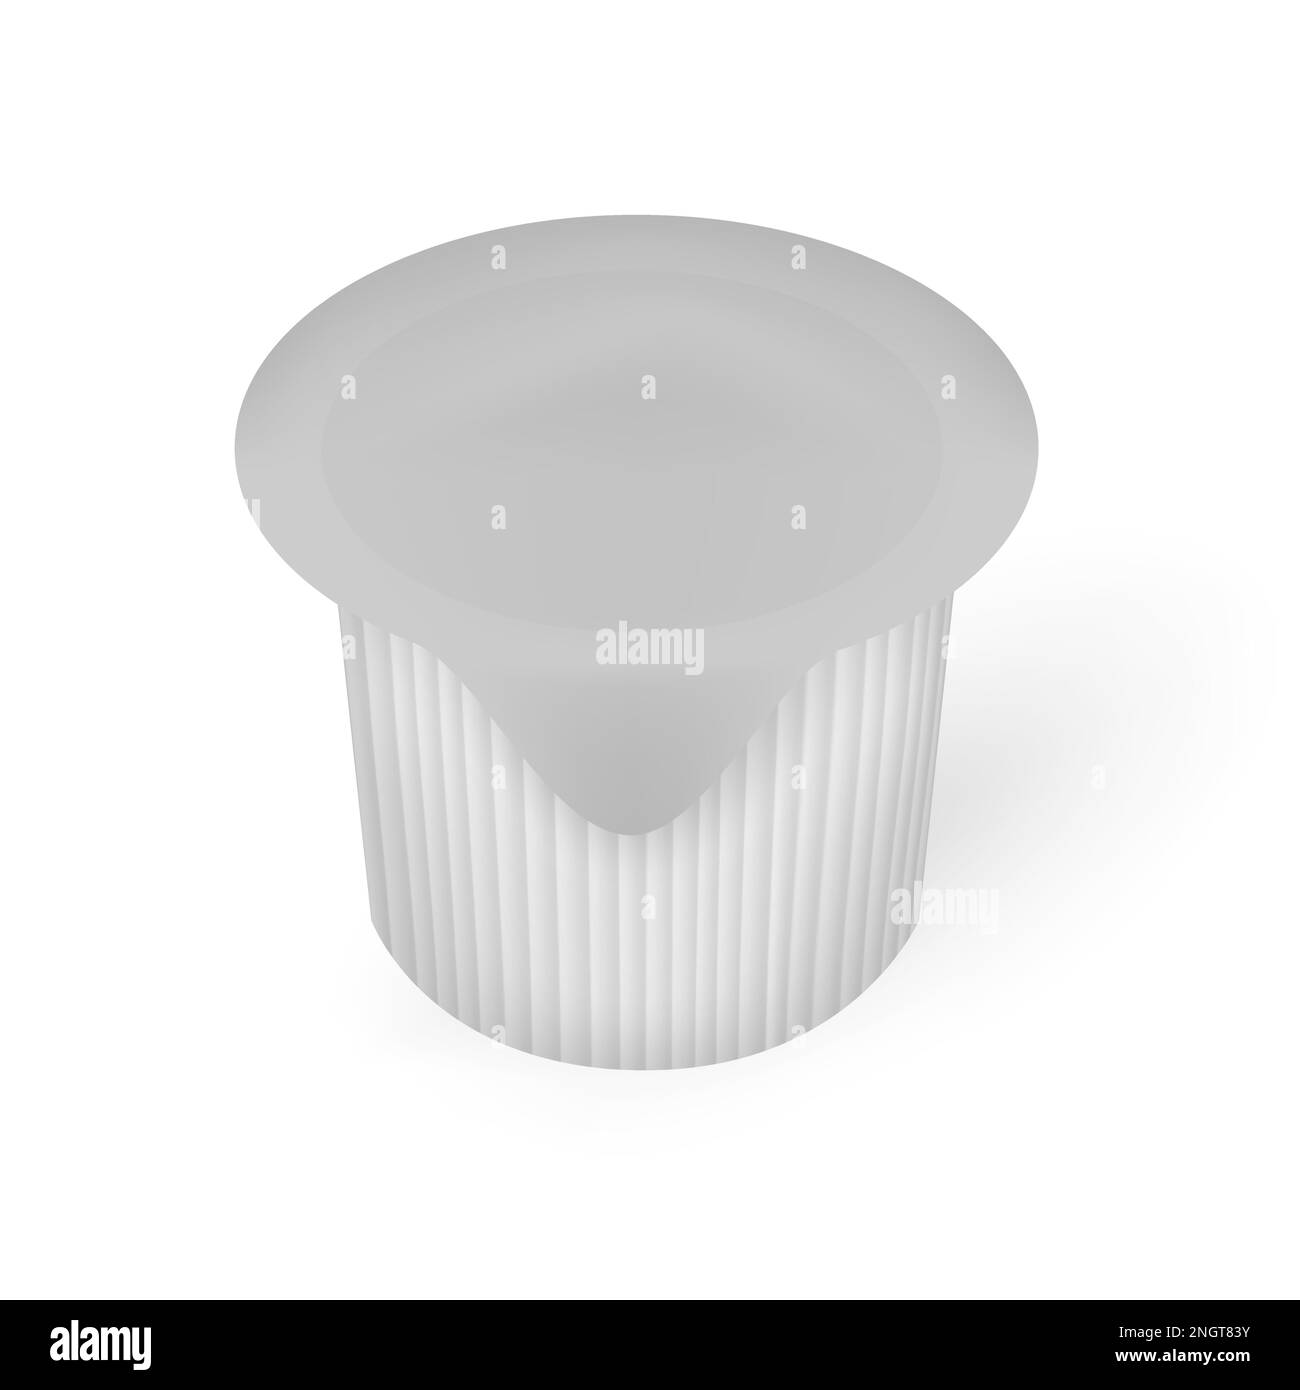 https://c8.alamy.com/comp/2NGT83Y/liquid-coffee-creamer-single-package-vector-template-portioned-plastic-container-with-lidding-film-top-mockup-2NGT83Y.jpg